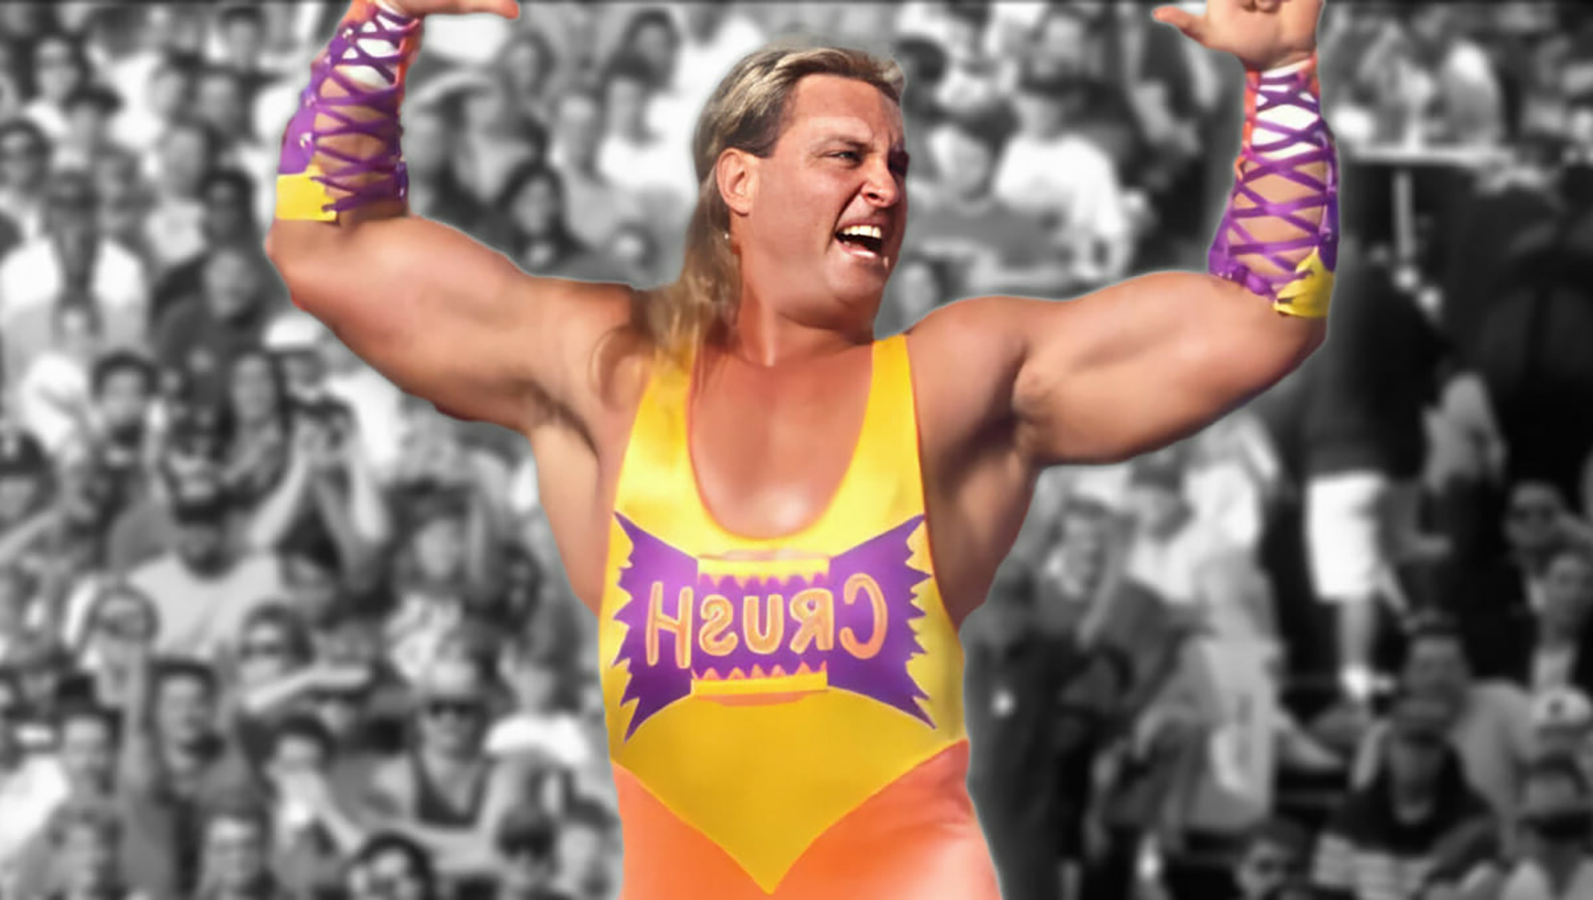 The Tragic Loss of "Crush" Brian Adams: The WWE Wrestlers Mysterious Life